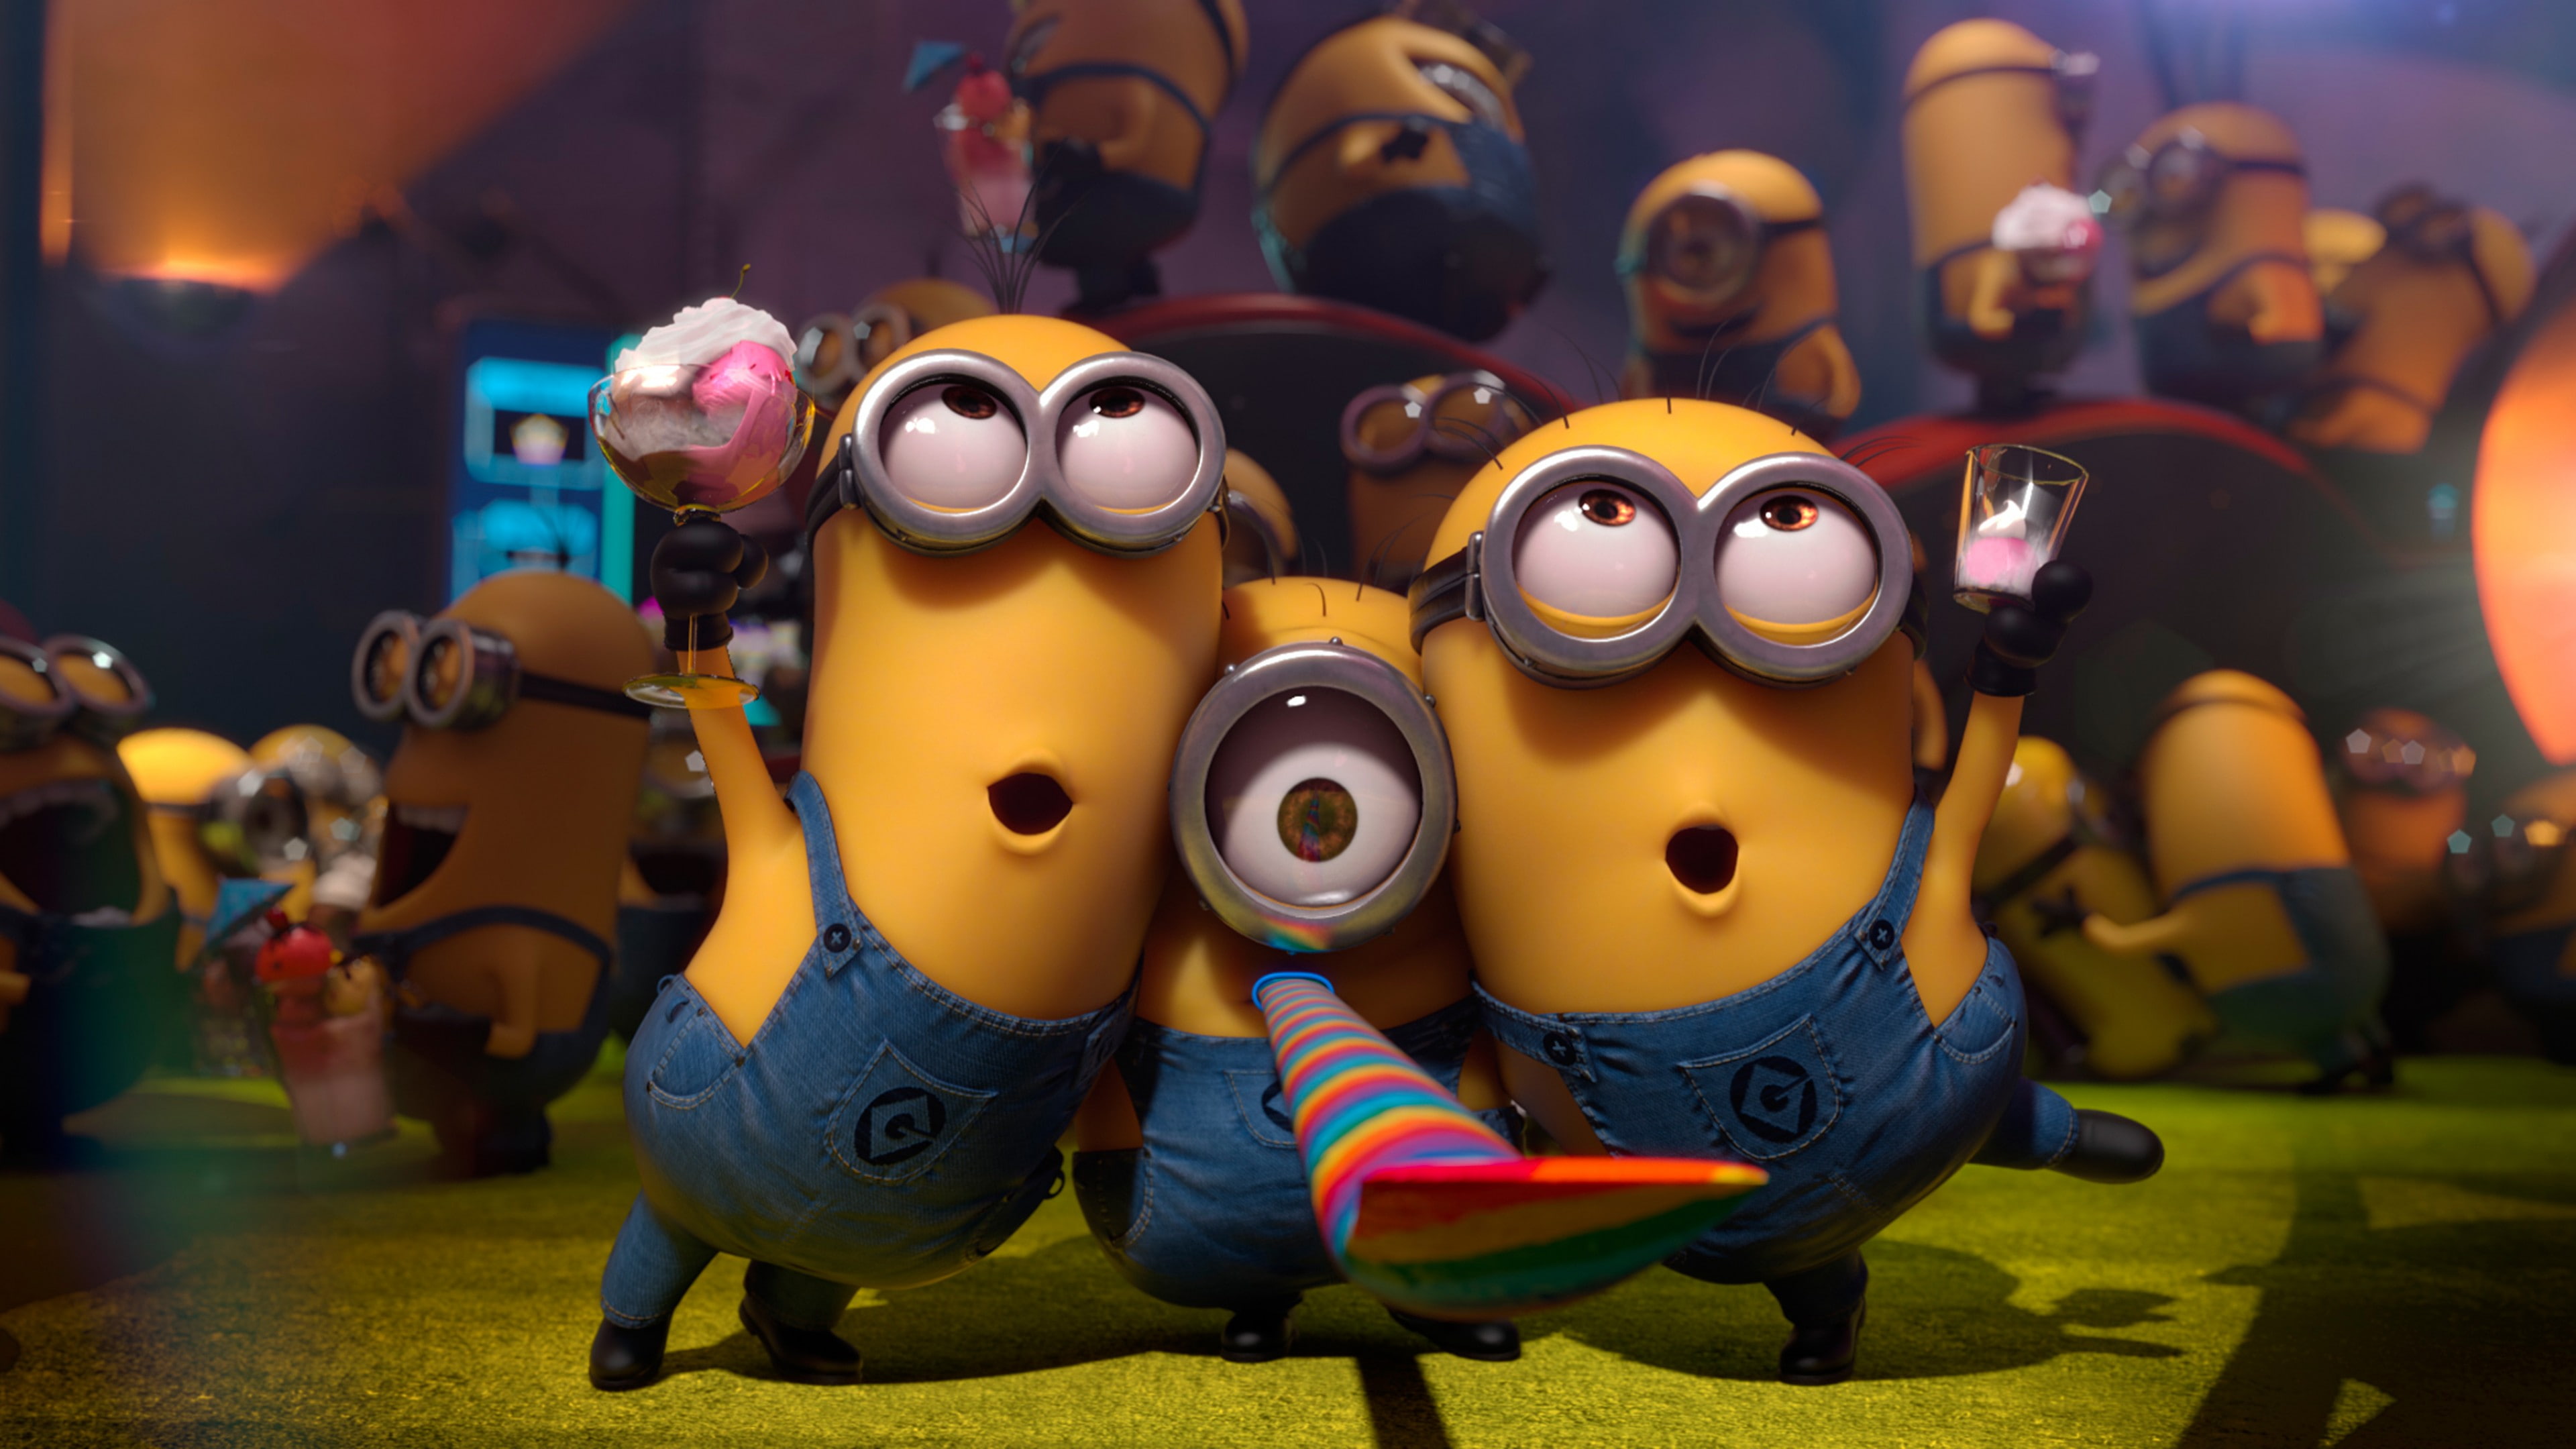 Despicable Me Minions digital wallpaper, cartoon, Best Animation Movies of 2015